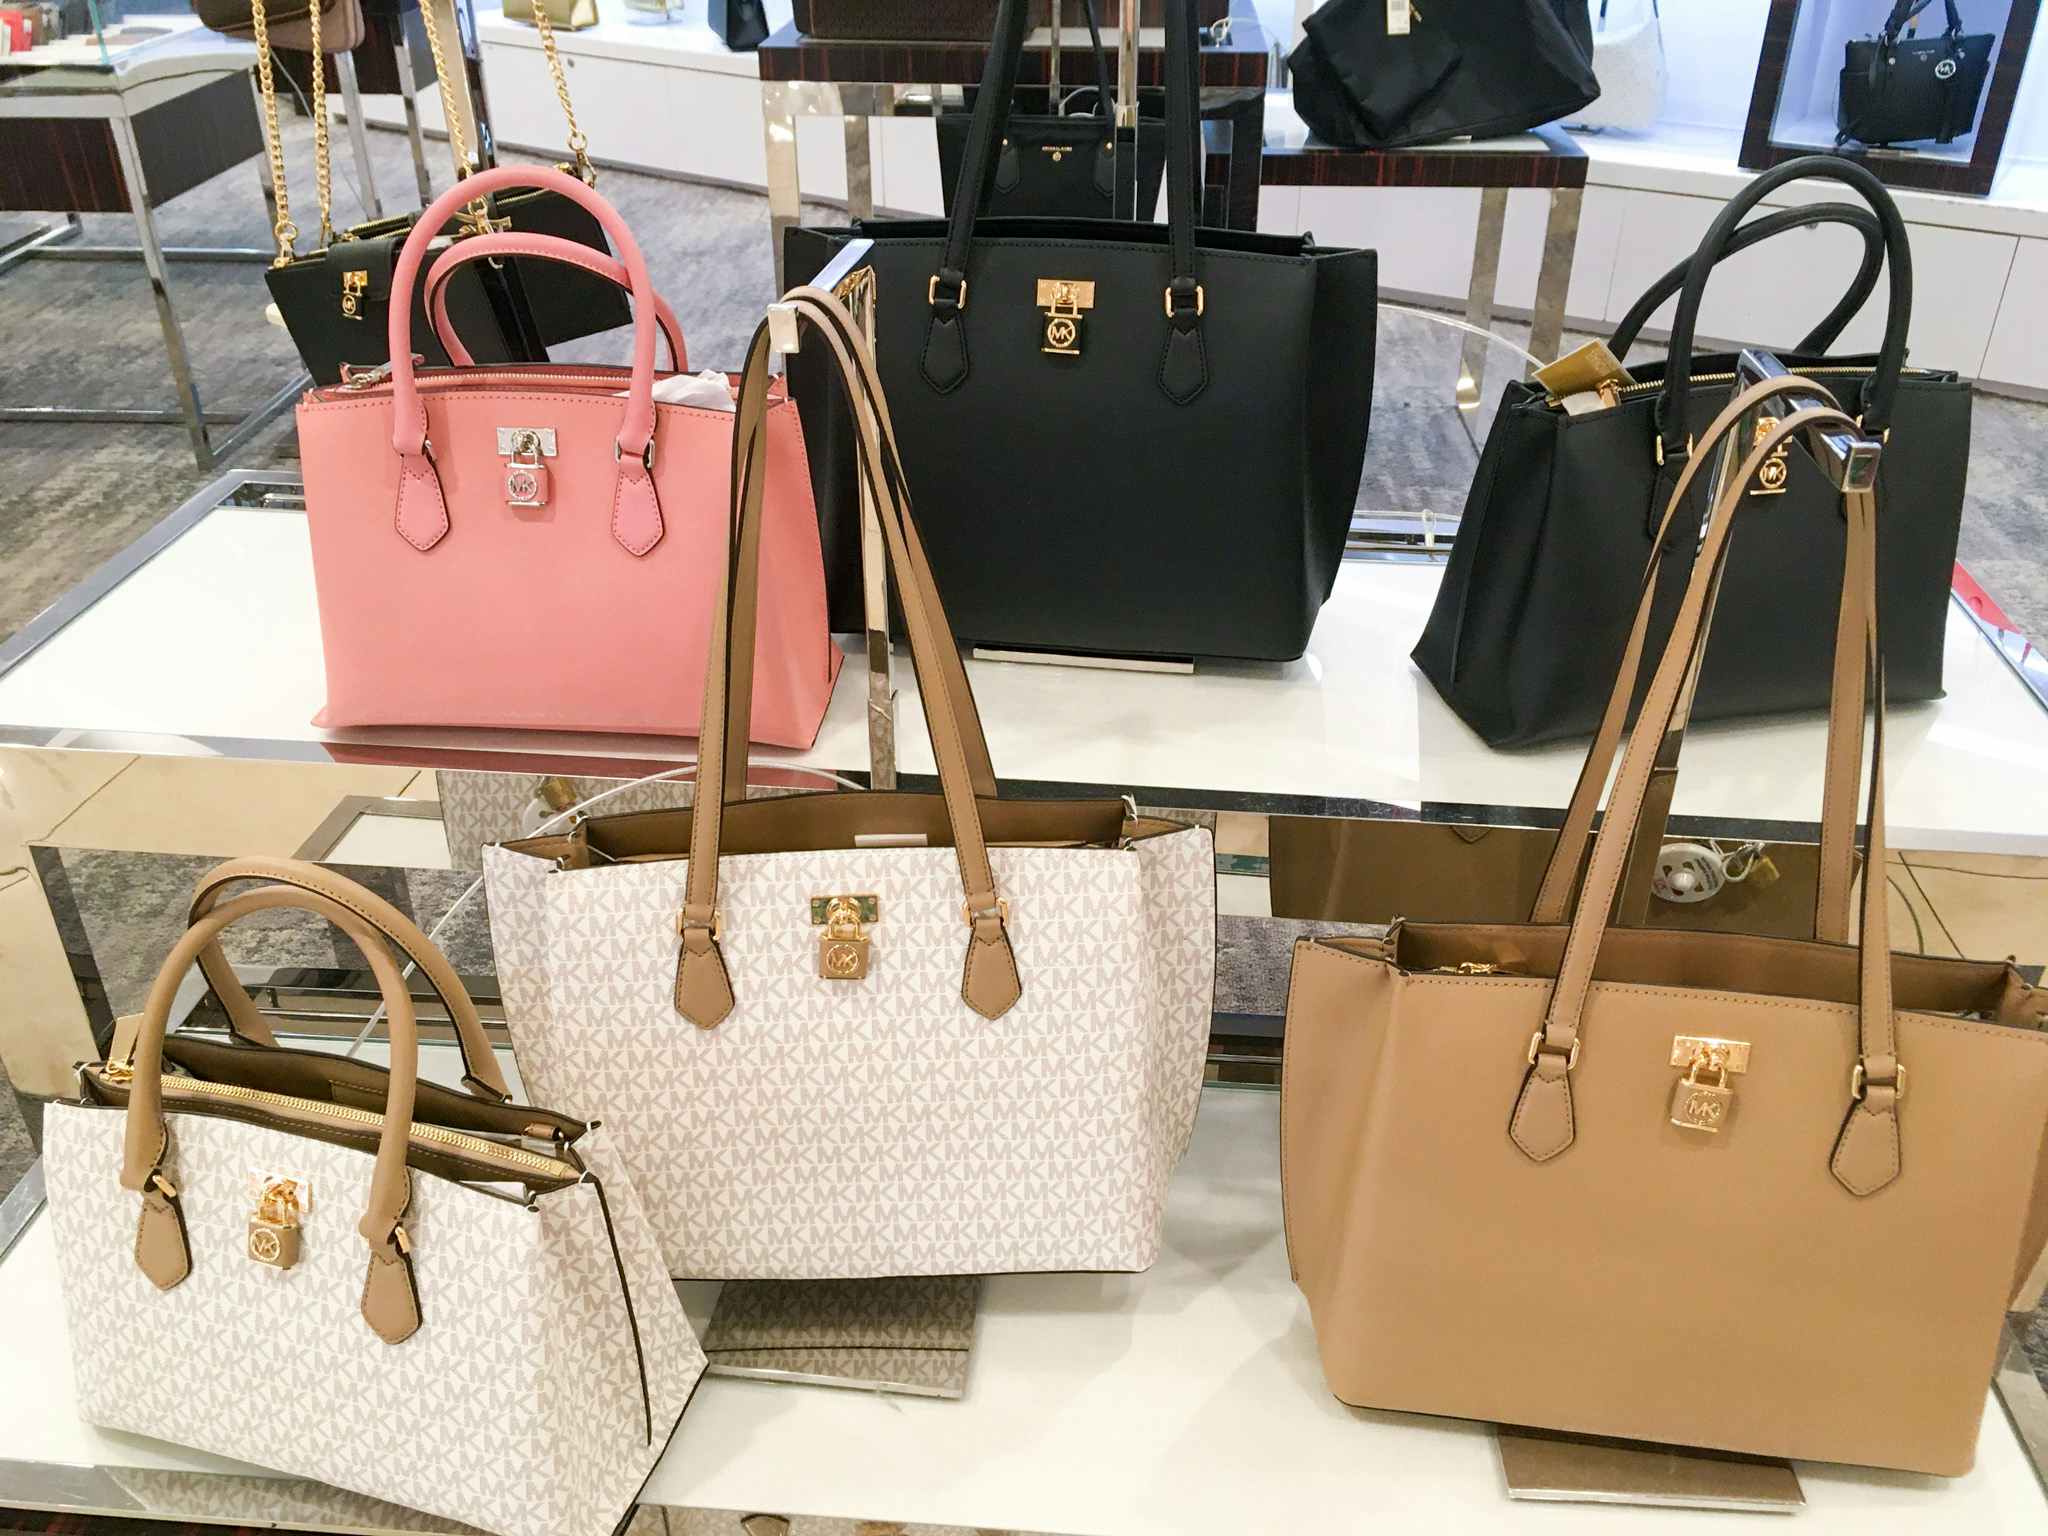 Spring Sale at Michael Kors: $69 Crossbody, $99 Backpack, and $109 Large Tote Bag